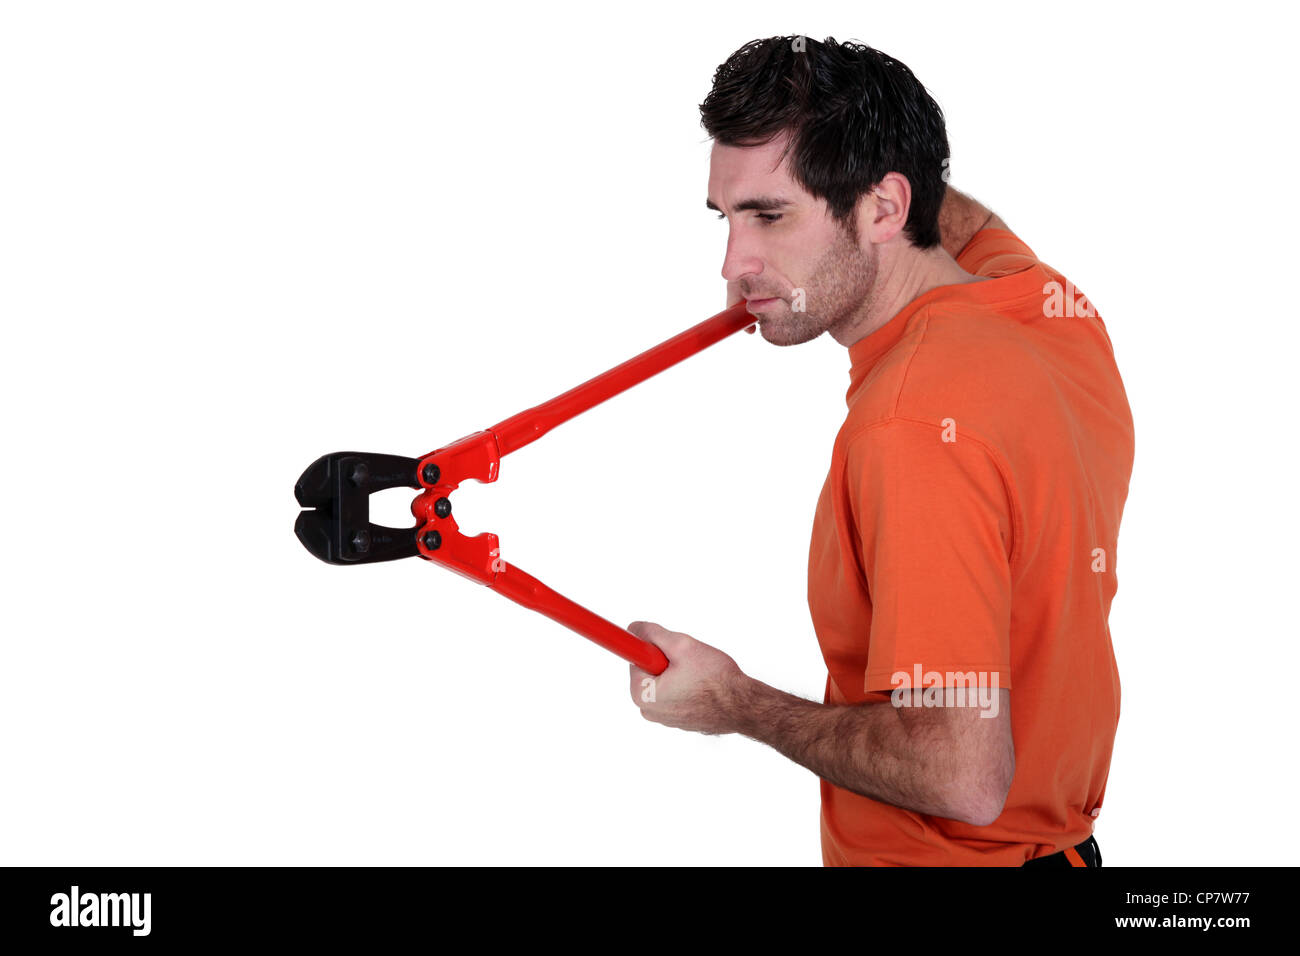 Man holding bolt-cutters Stock Photo